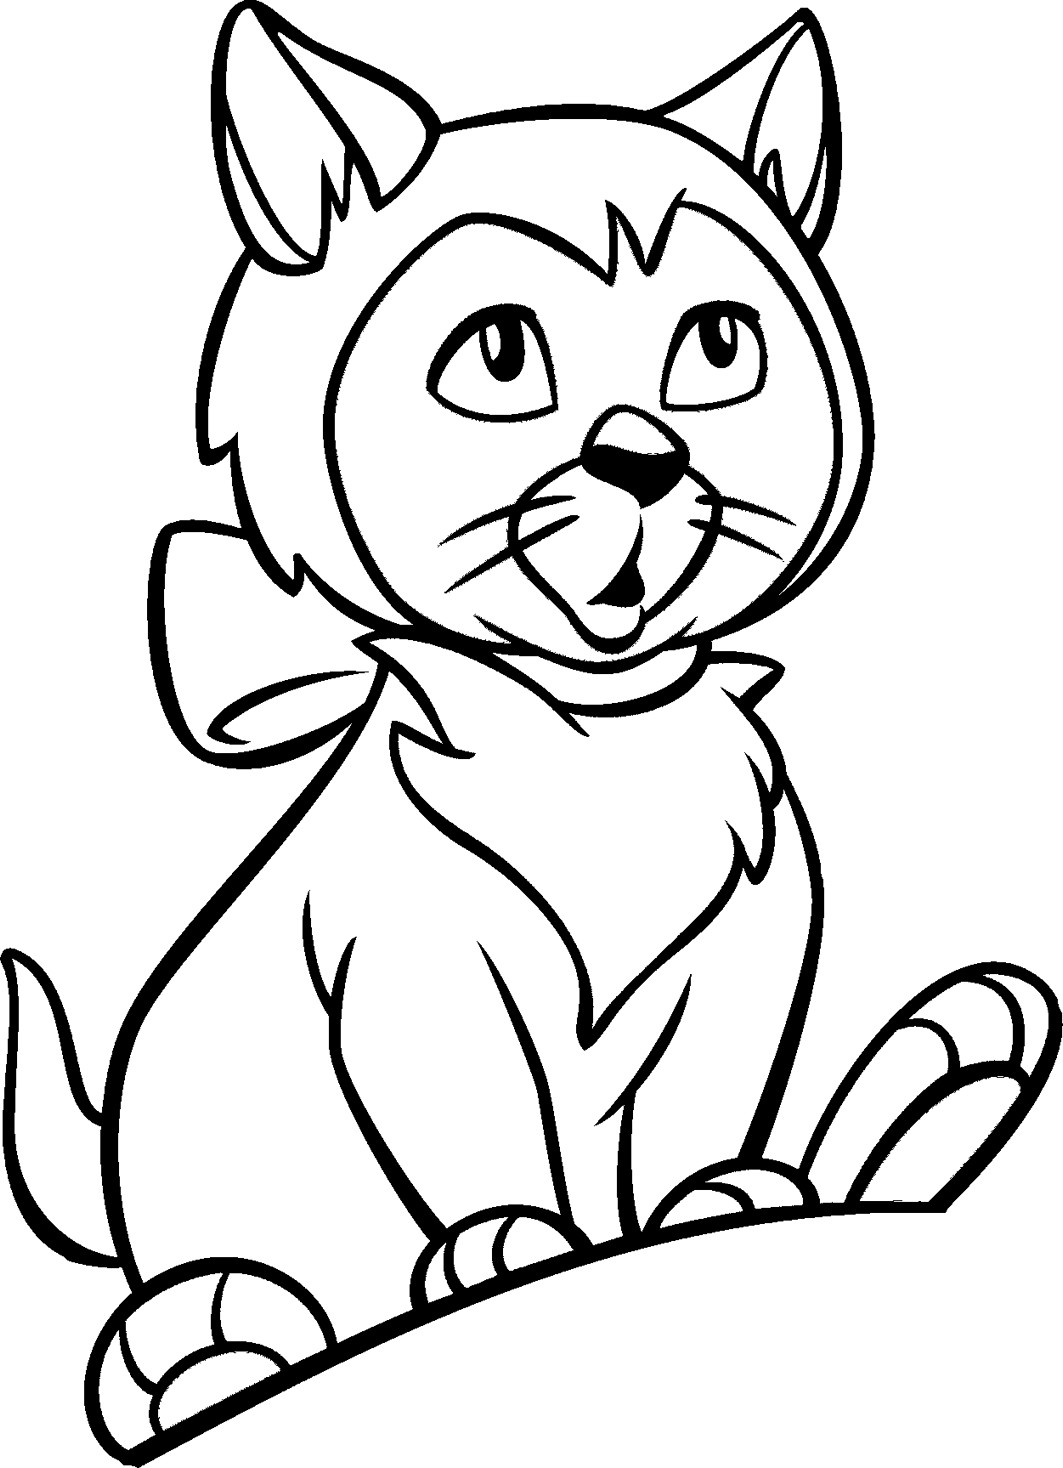 Kids Coloring Book
 Coloring Pages for Kids Cat Coloring Pages for Kids